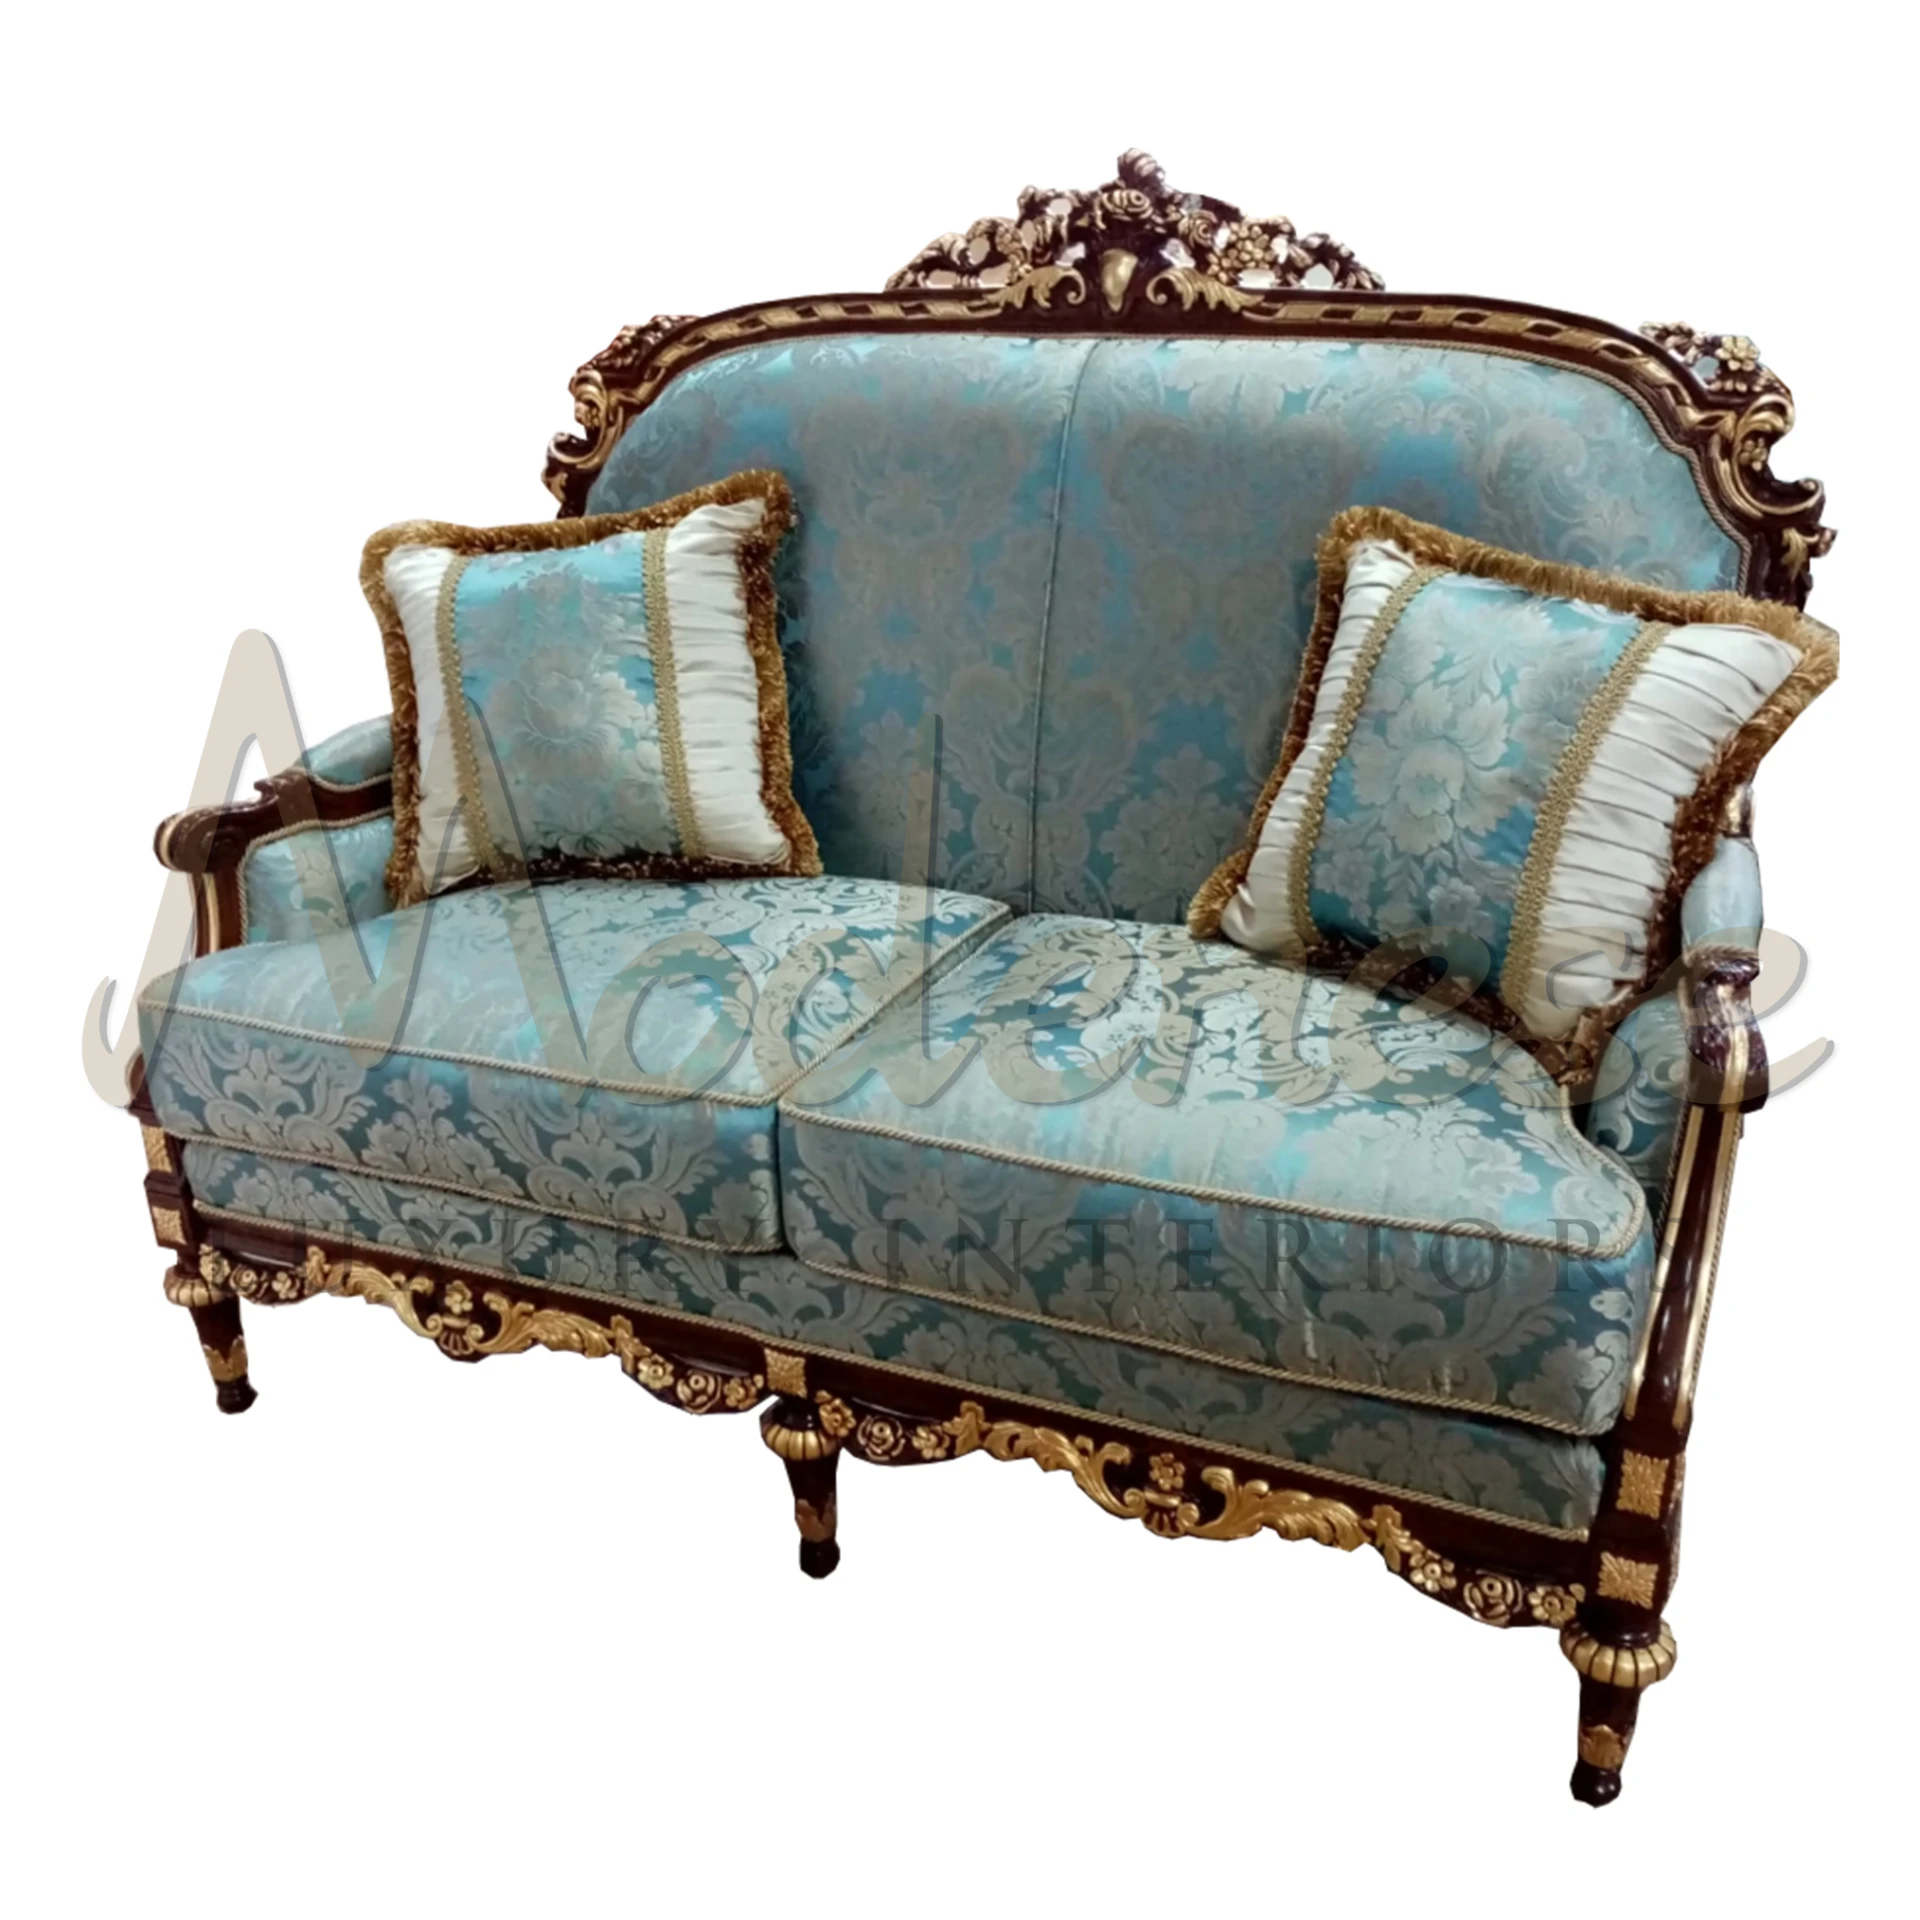 Luxury Dutch Sofa: Opulent 2-seater with gold-carved frame and silk upholstery, embodying baroque and Venetian elegance.